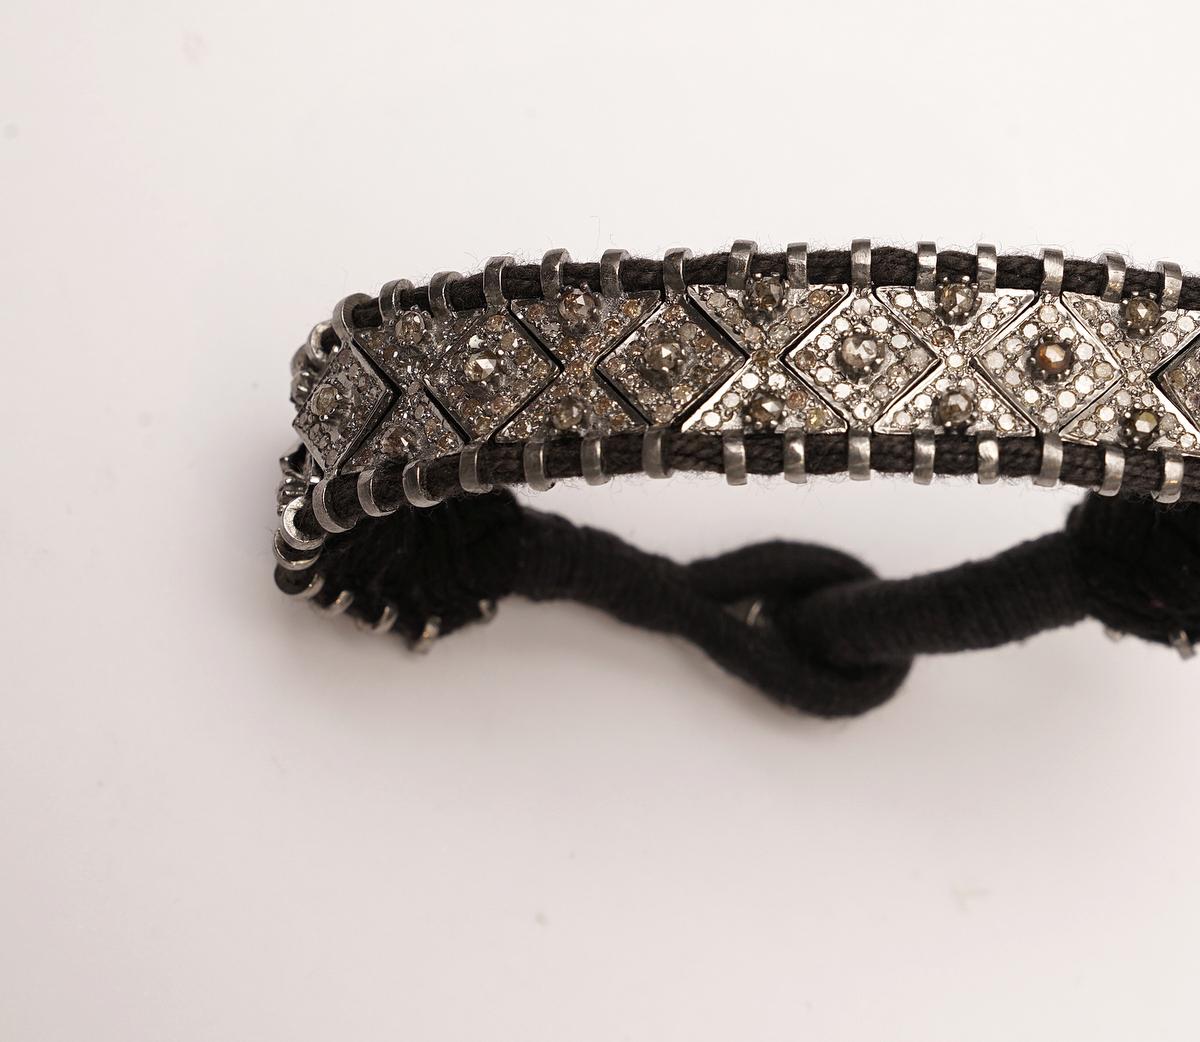 Articulated segments of pave`-set diamonds with bezel set champagne diamonds, all mounted in oxidized sterling silver links and threaded onto a woven black cotton cuff.  Button and loop closure also with pave`set diamonds.  Carat weight of diamonds